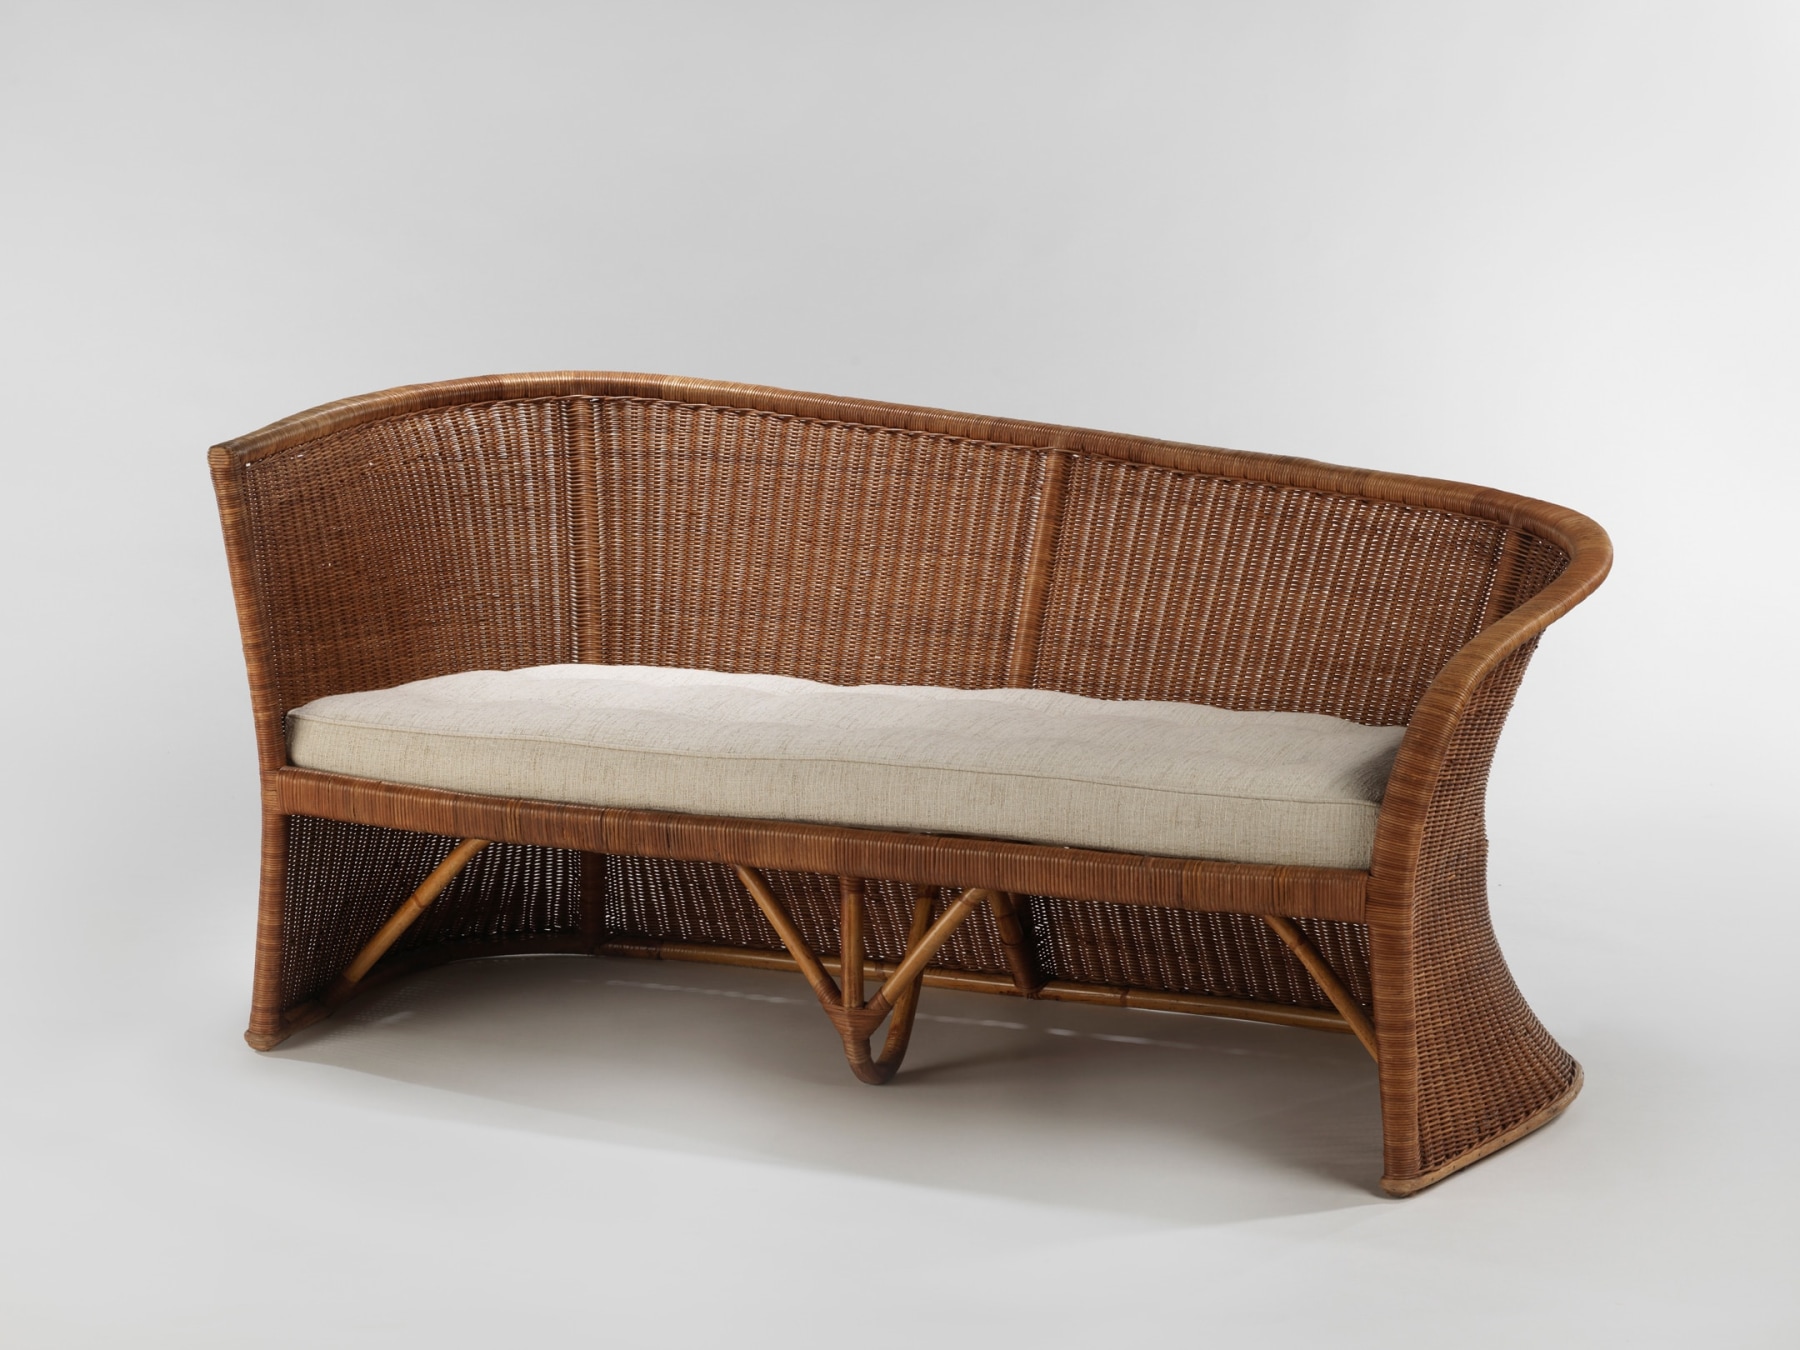 ANNOTATIONS | Rattan: Poetic Vocabulary of Shapes -  - made in France - Demisch Danant